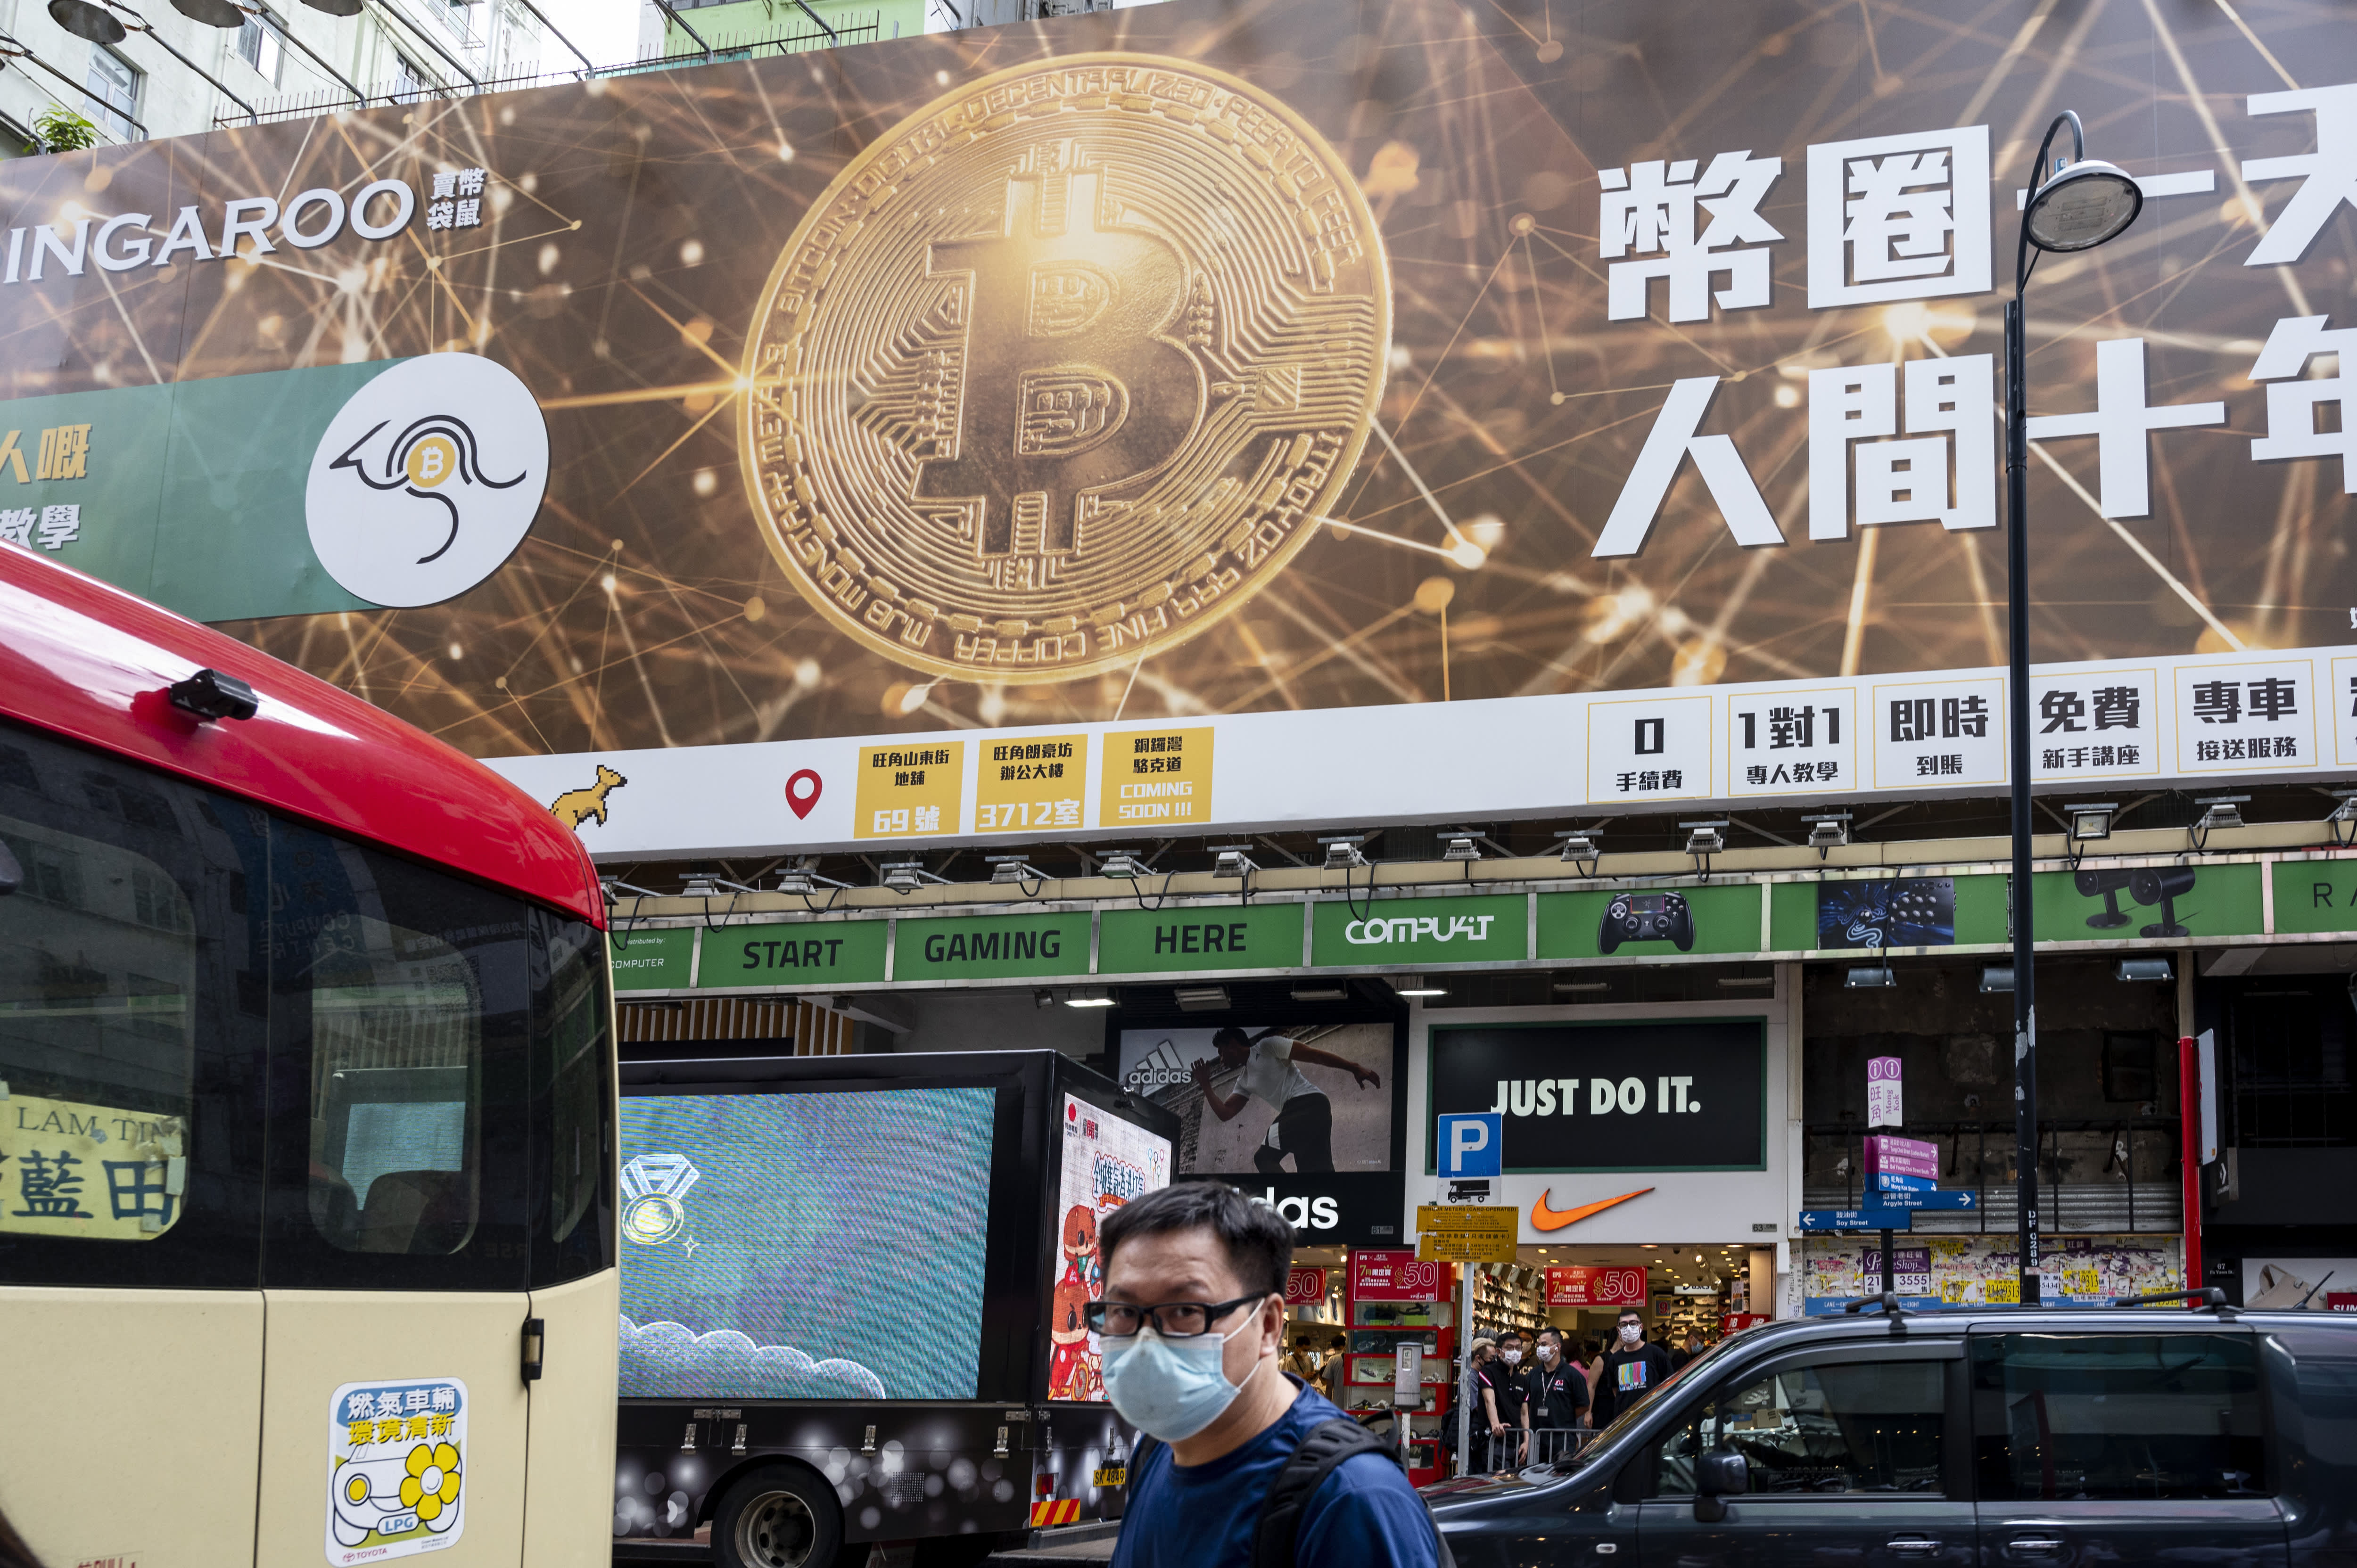 Cryptocurrencies tumble after China’s latest crackdown. Here’s why traders see opportunity – CNBC